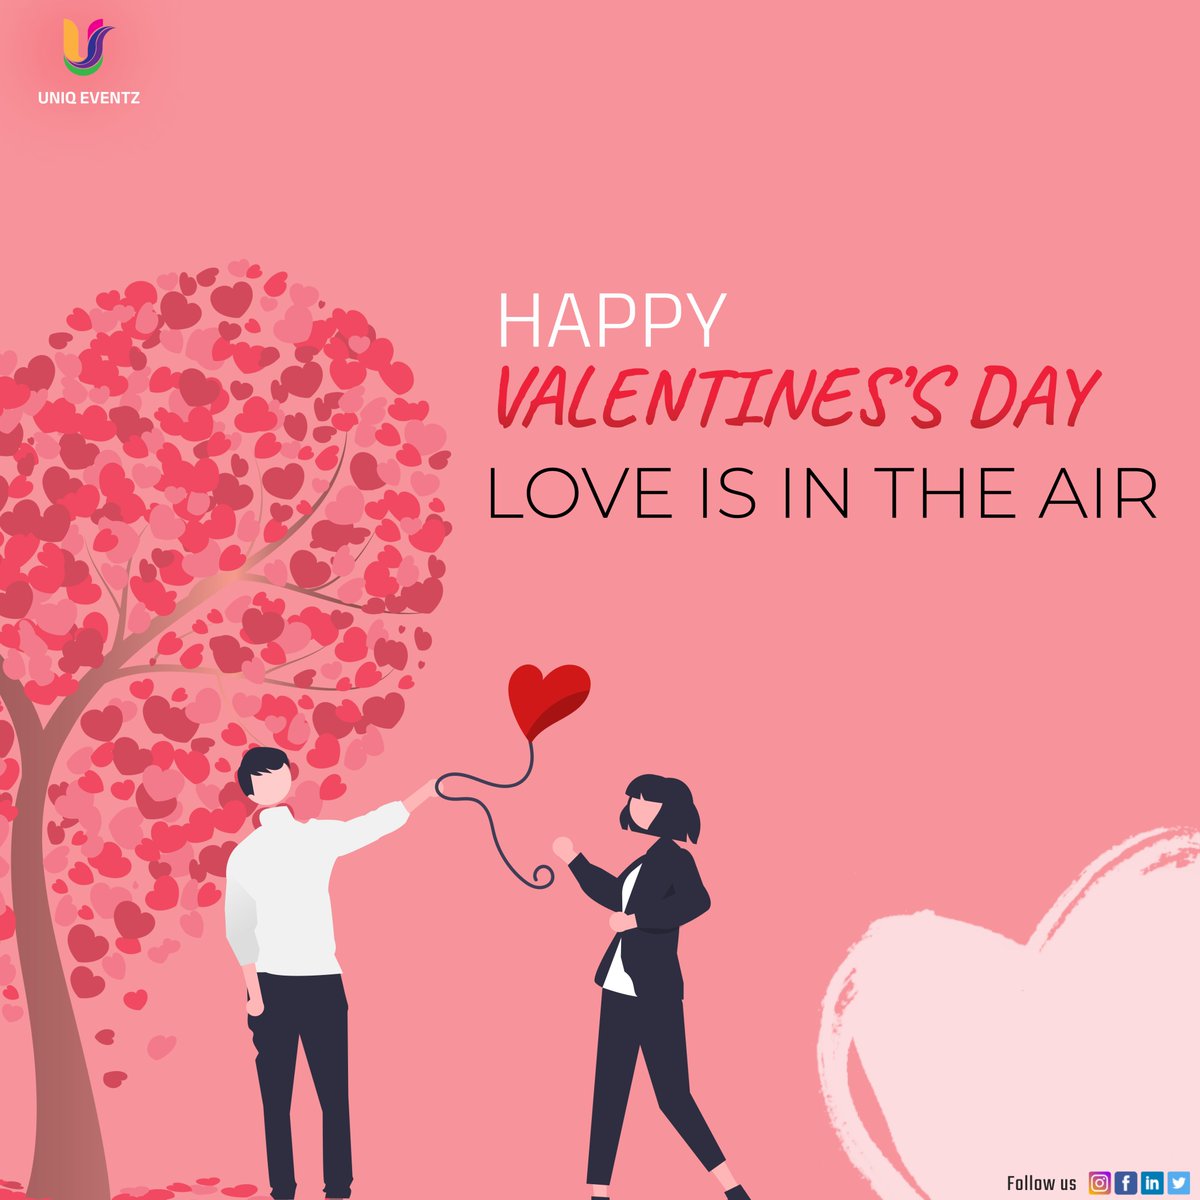 Embrace the UNIQ love story this Valentine's Day. Let the magic of UNIQ unfold in your celebrations. ❤️#ValentinesMagic #BeUNIQ #ValentinesDay #UniqueLove #UniqProductionz #eventplanner #eventrentals #eventmanagement